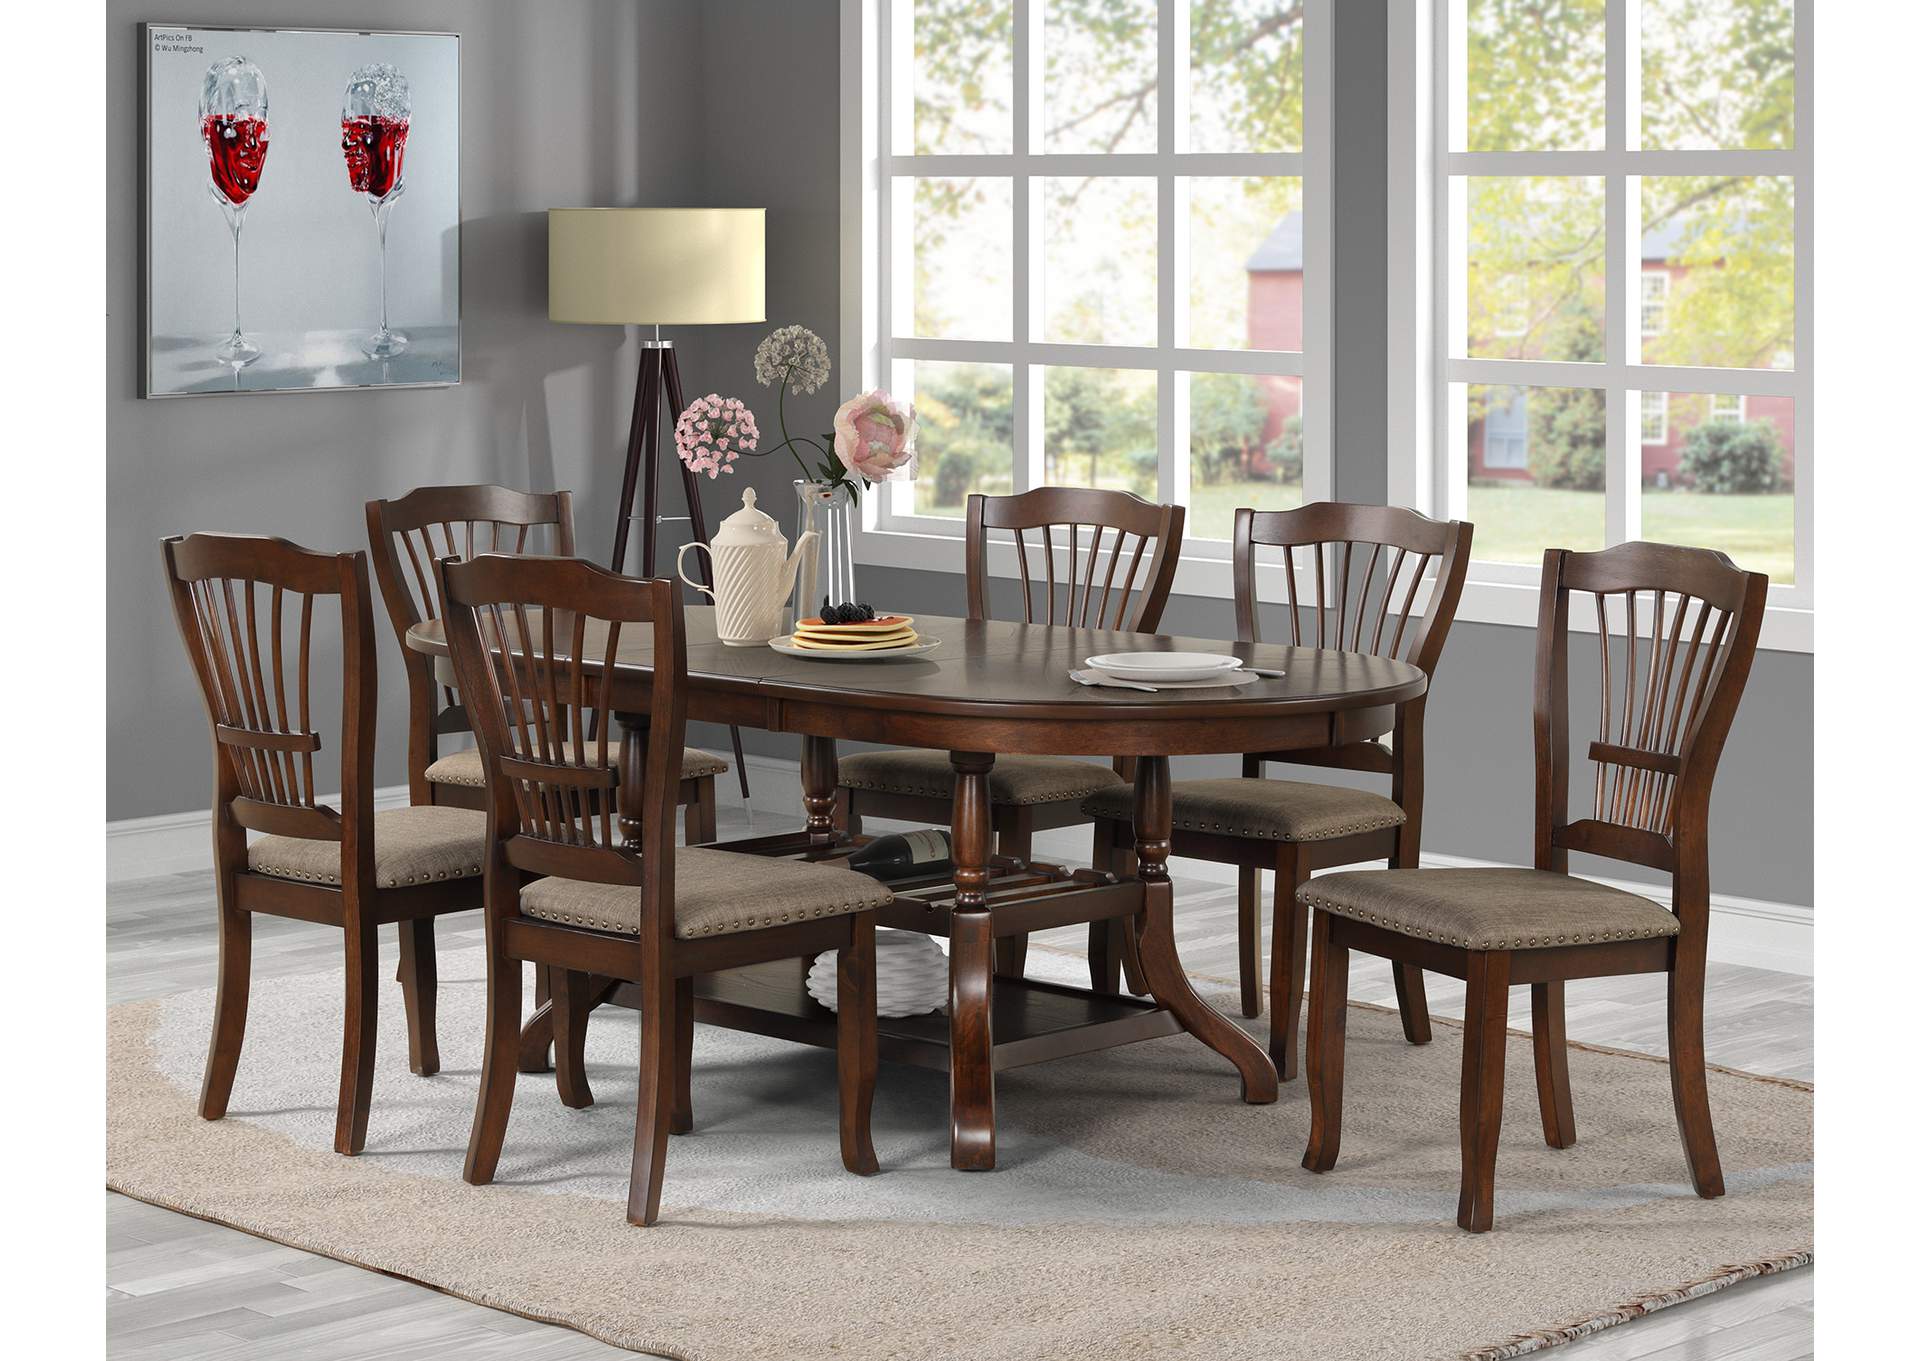 D2424 Bixby Rectangle Dining Table,Global Trading